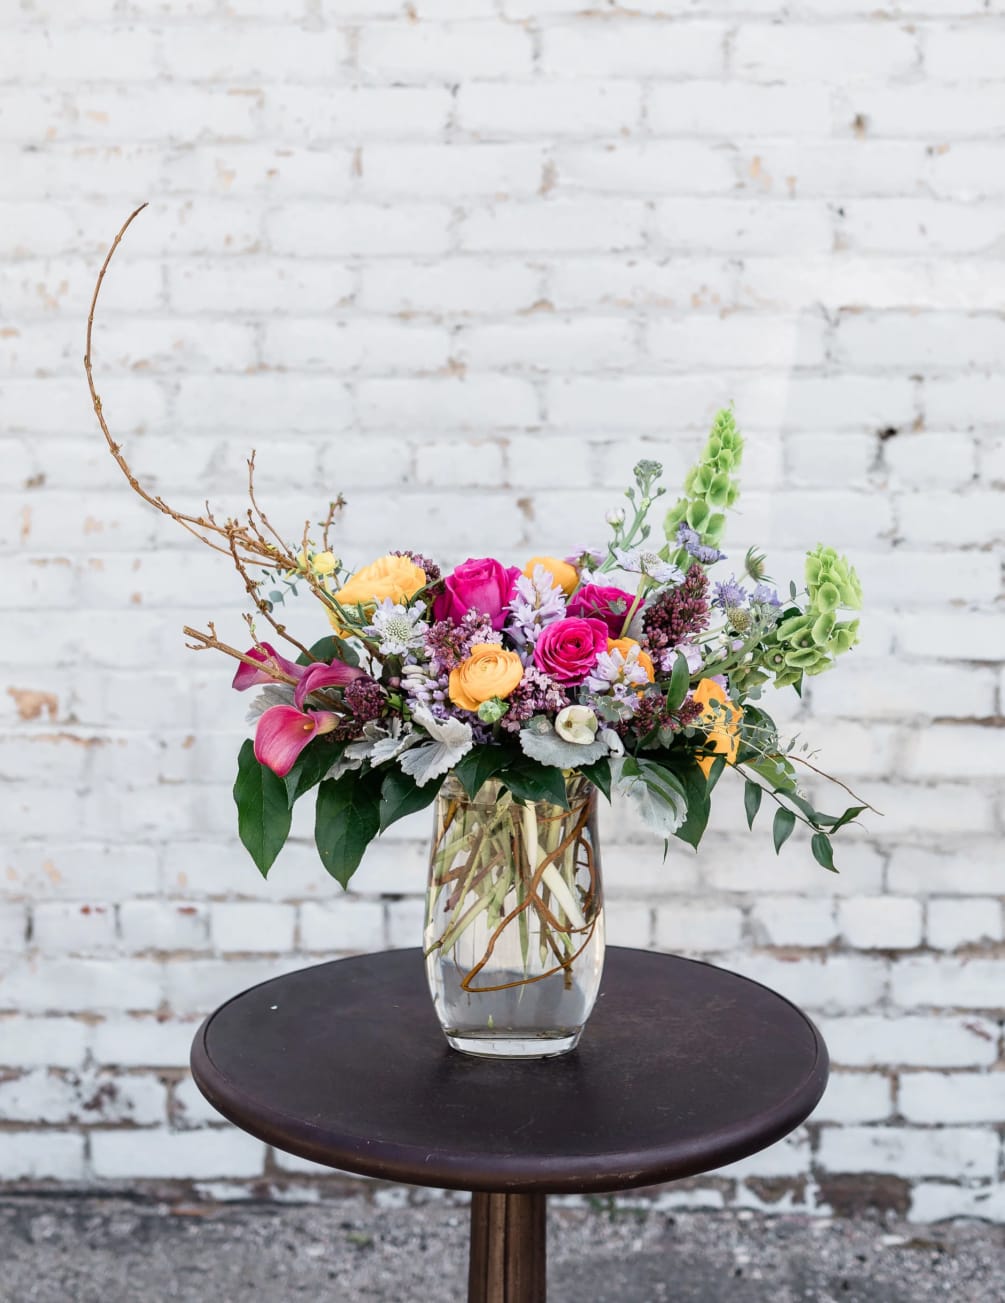 Stunning spring arrangement complemented with gorgeous textures and bright tones! Perfect for